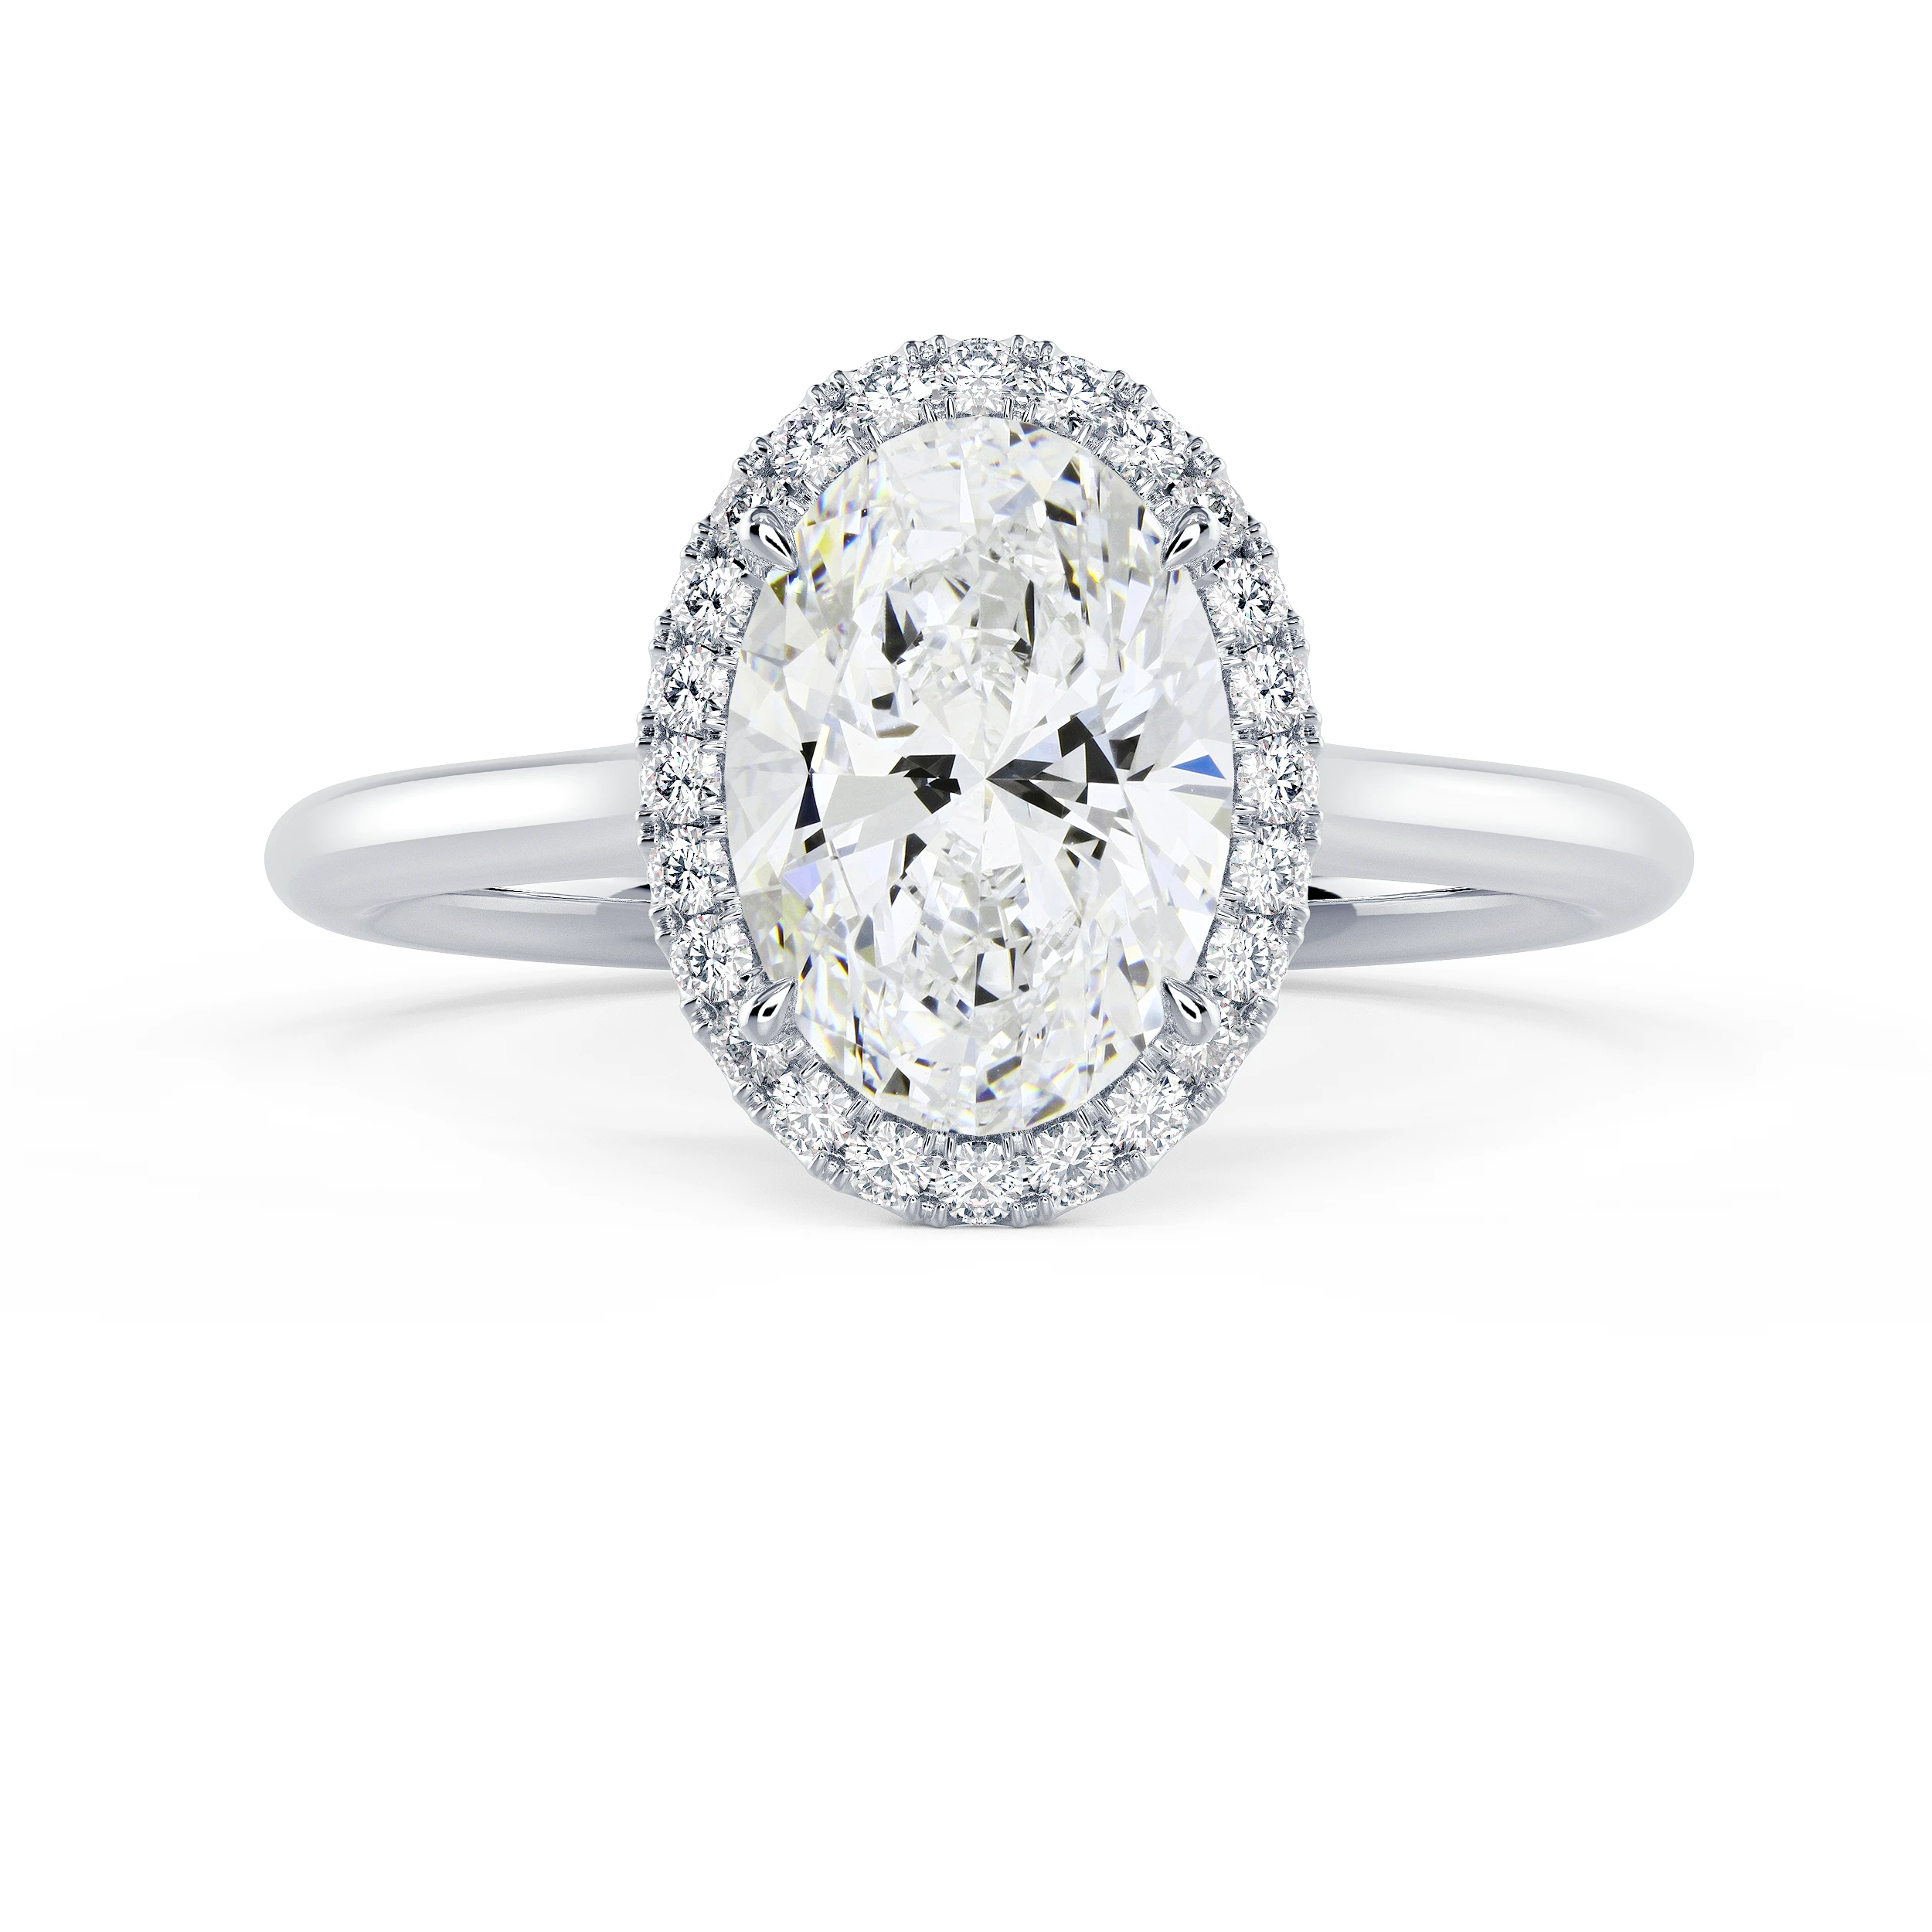 2.0 ct Lab-Created Diamond Oval Single Halo Engagement Ring in 18k White Gold - Product AD-416